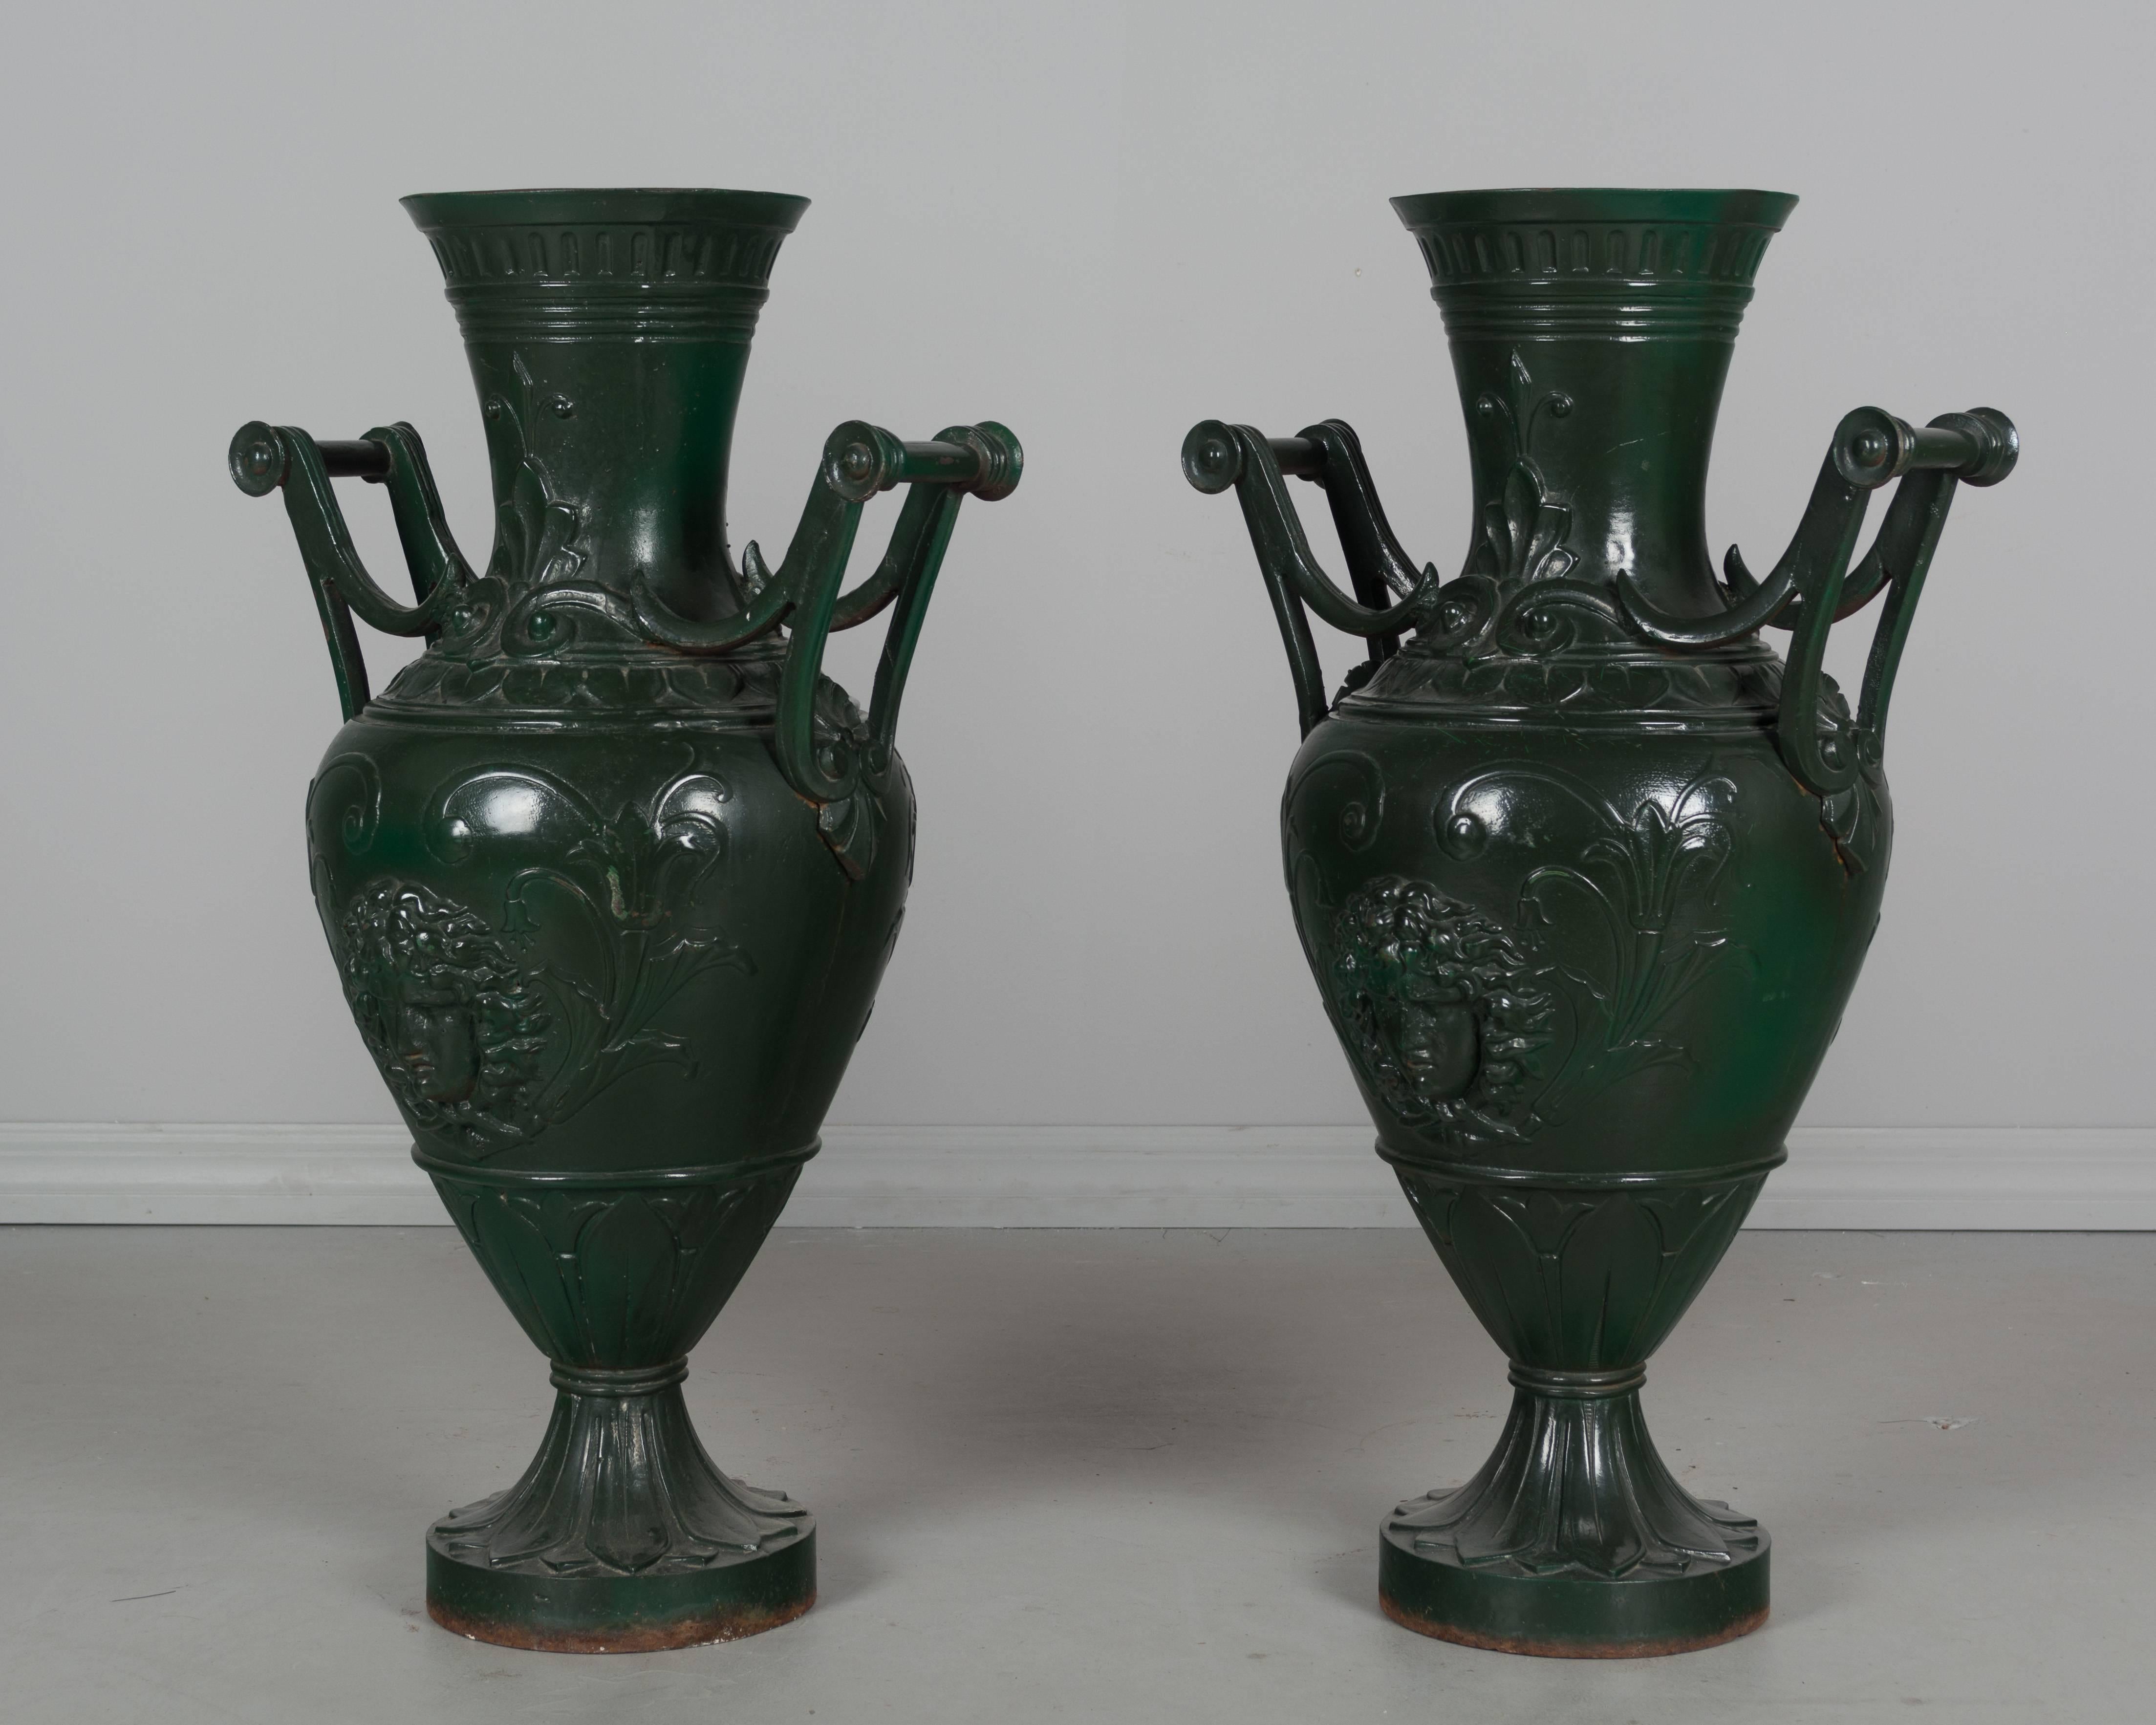 Pair of French Art Nouveau cast iron garden urns with dark green painted patina.  Weight: 90lbs. each
More photos available upon request. We have a large selection of French antiques at Olivier Fleury, Inc. Please visit our showroom in Winter Park,